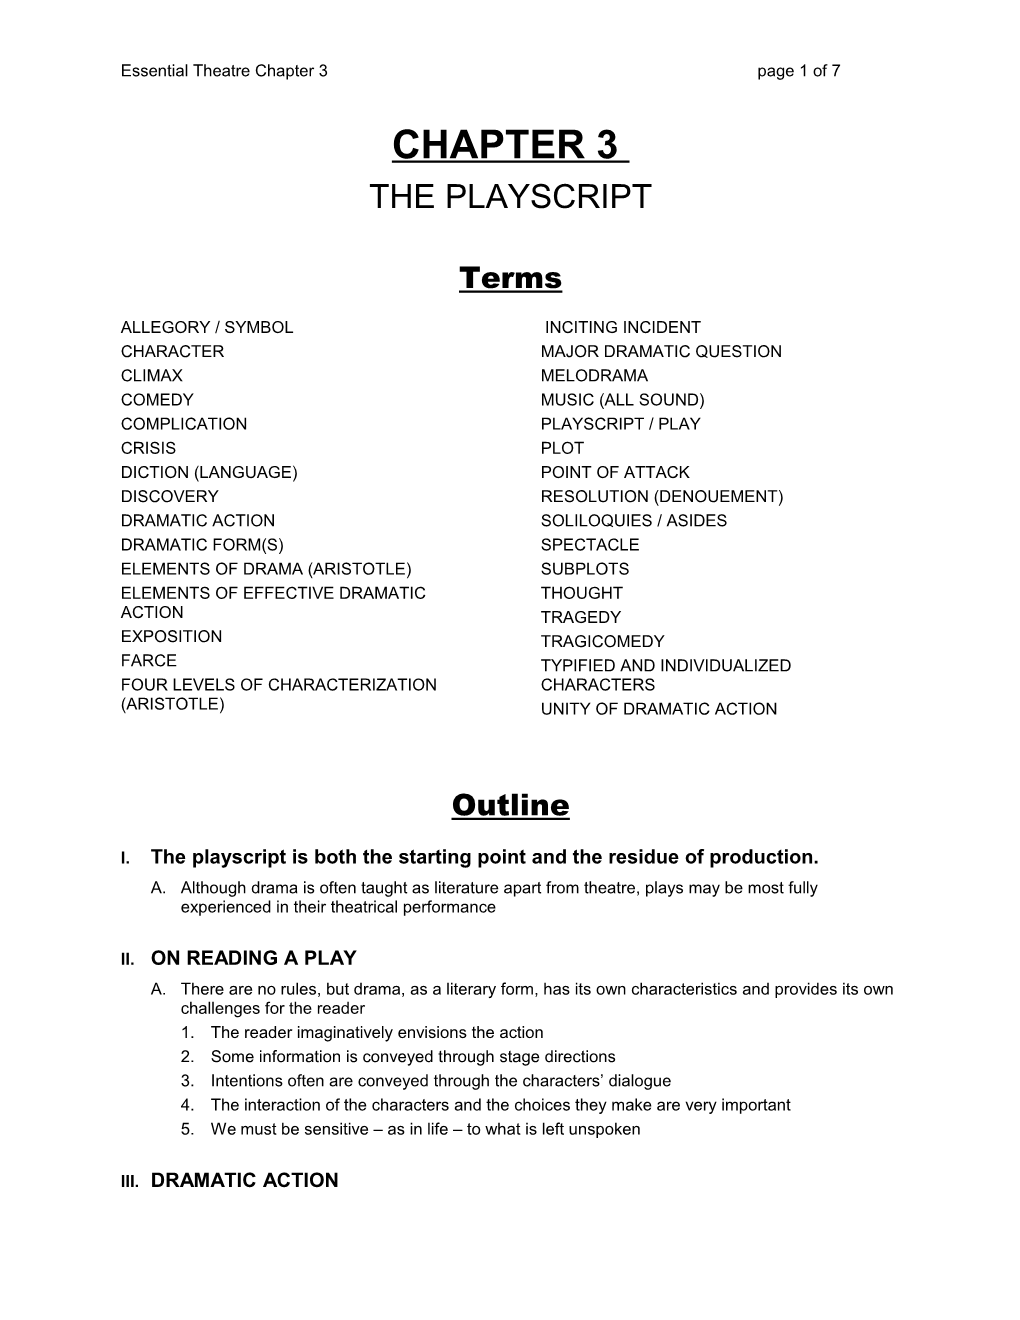 Chapter 3 The Playscript:17 Pages